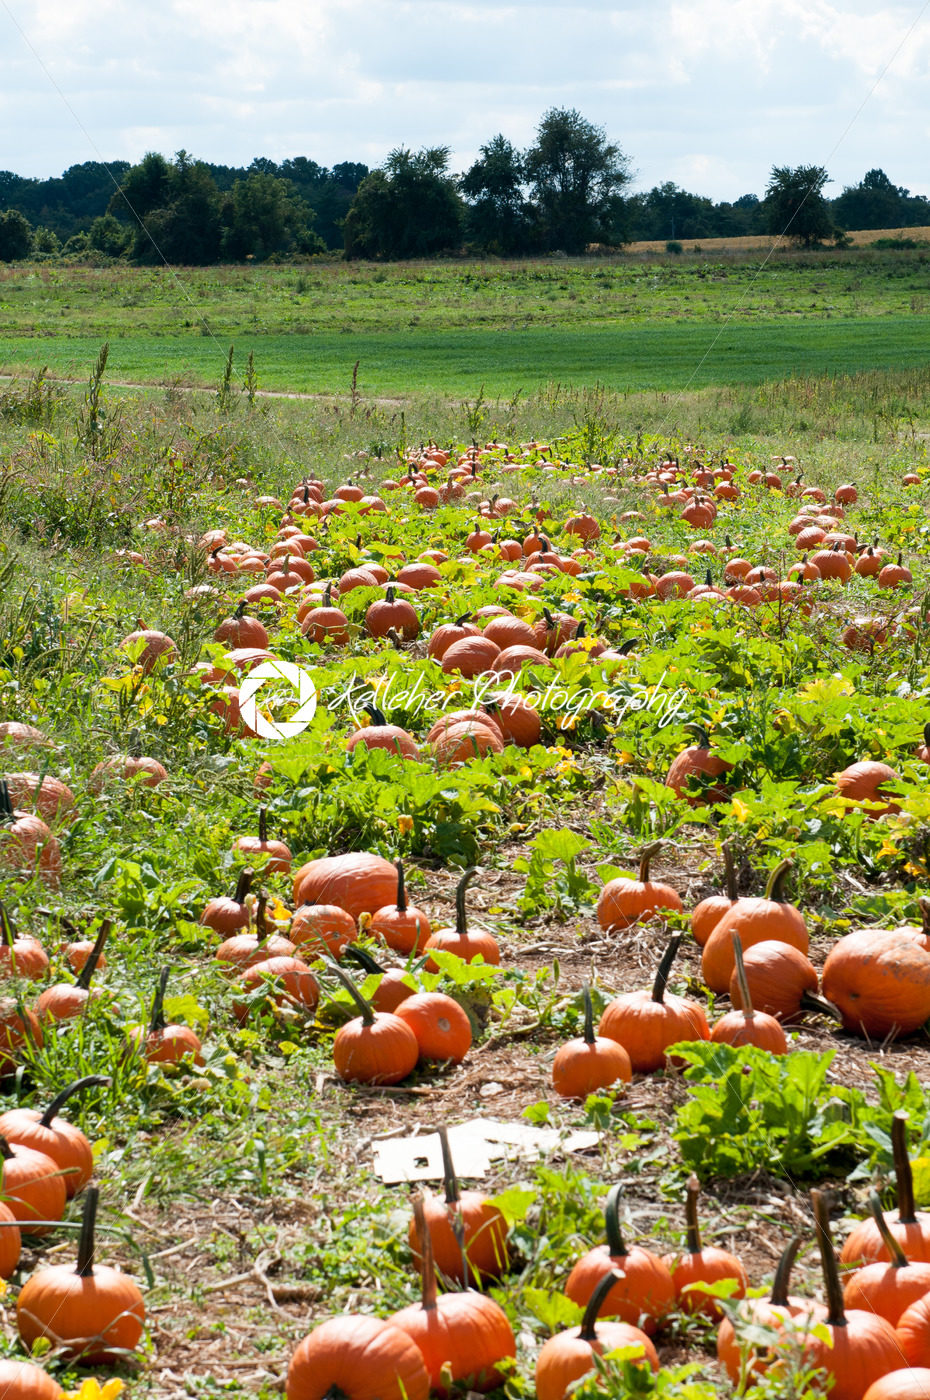 Various Pumpkins in green field during fall - Kelleher Photography Store